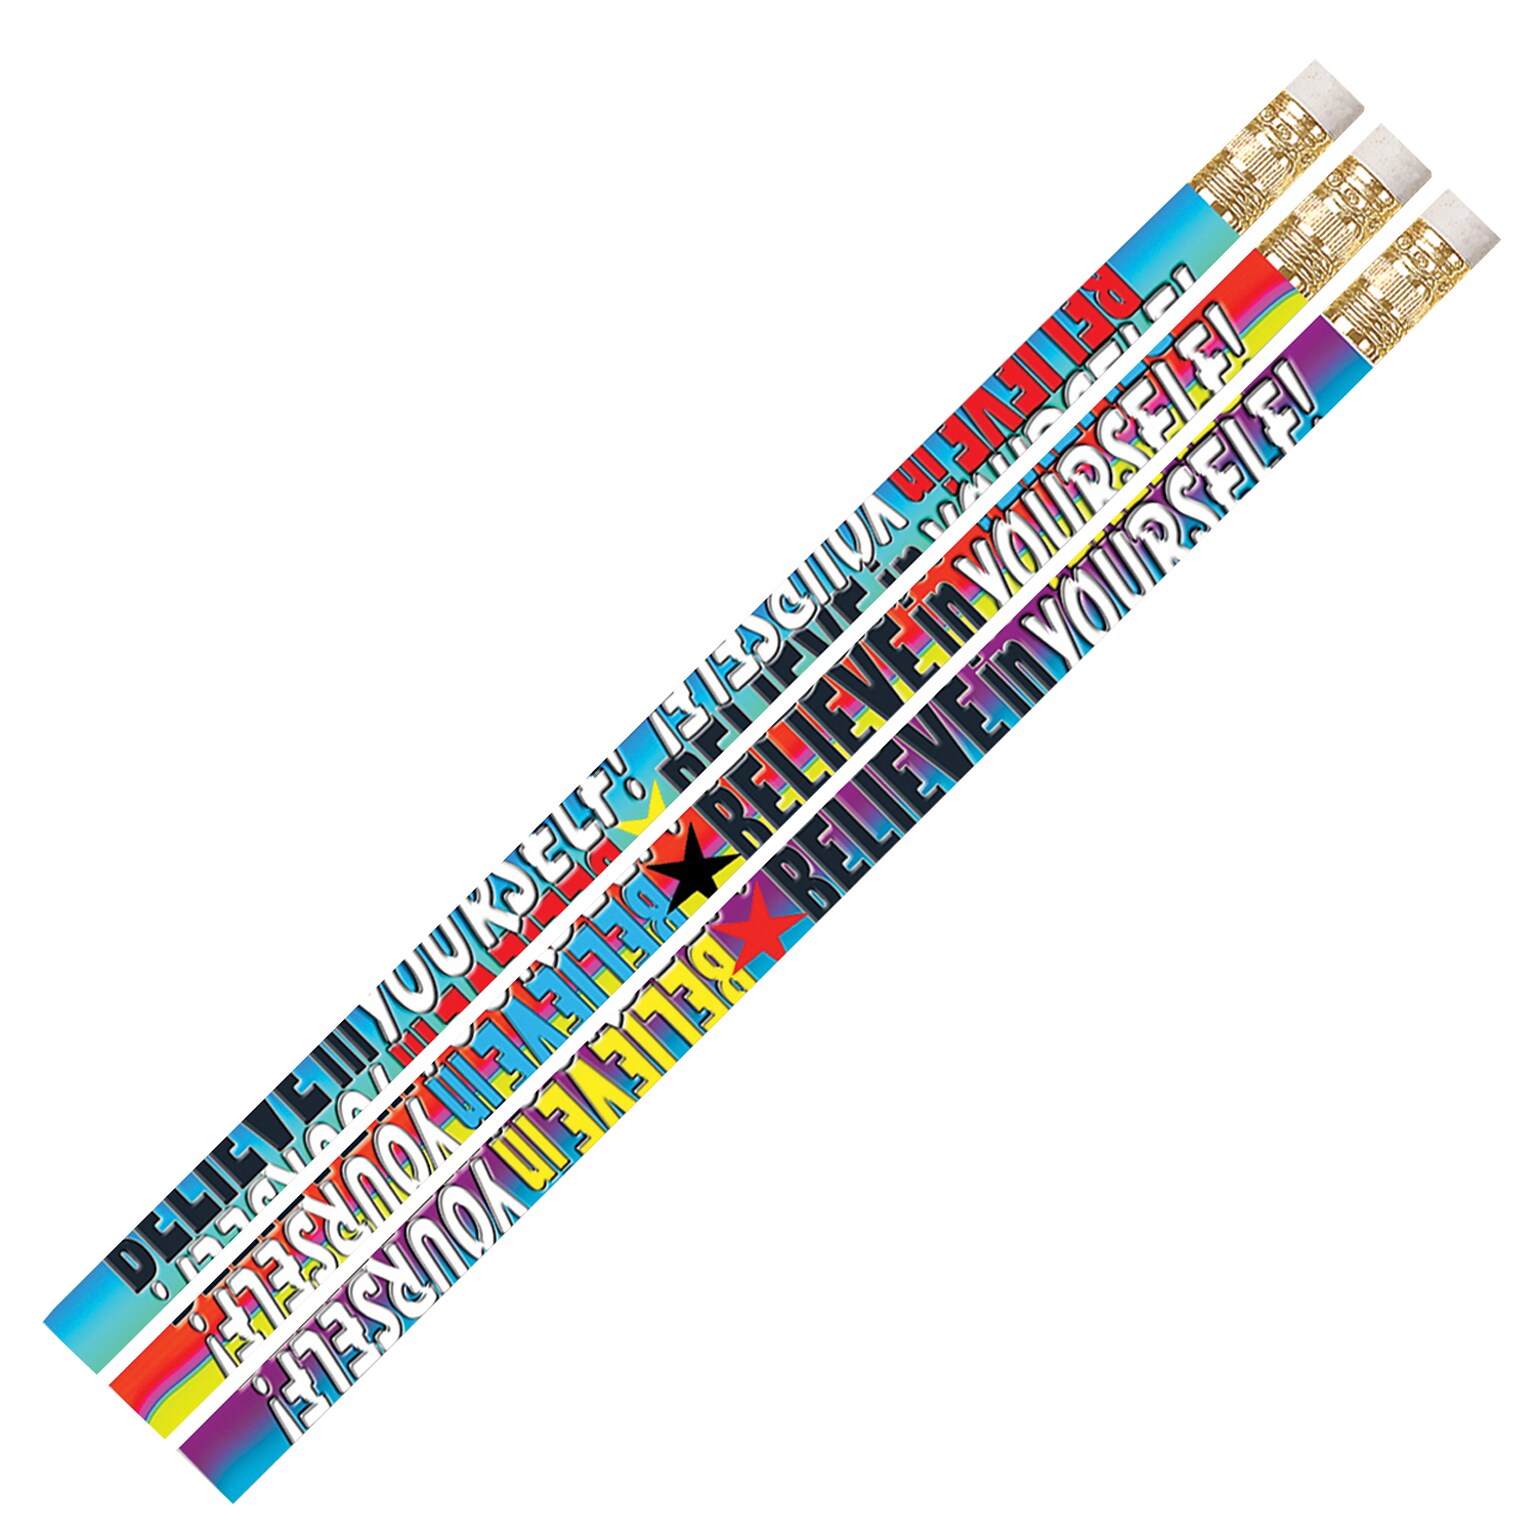 Musgrave Pencil Company Believe In Yourself Motivational Pencils, #2 Lead, 12/Pack, 12 Packs (MUS2283D-12)